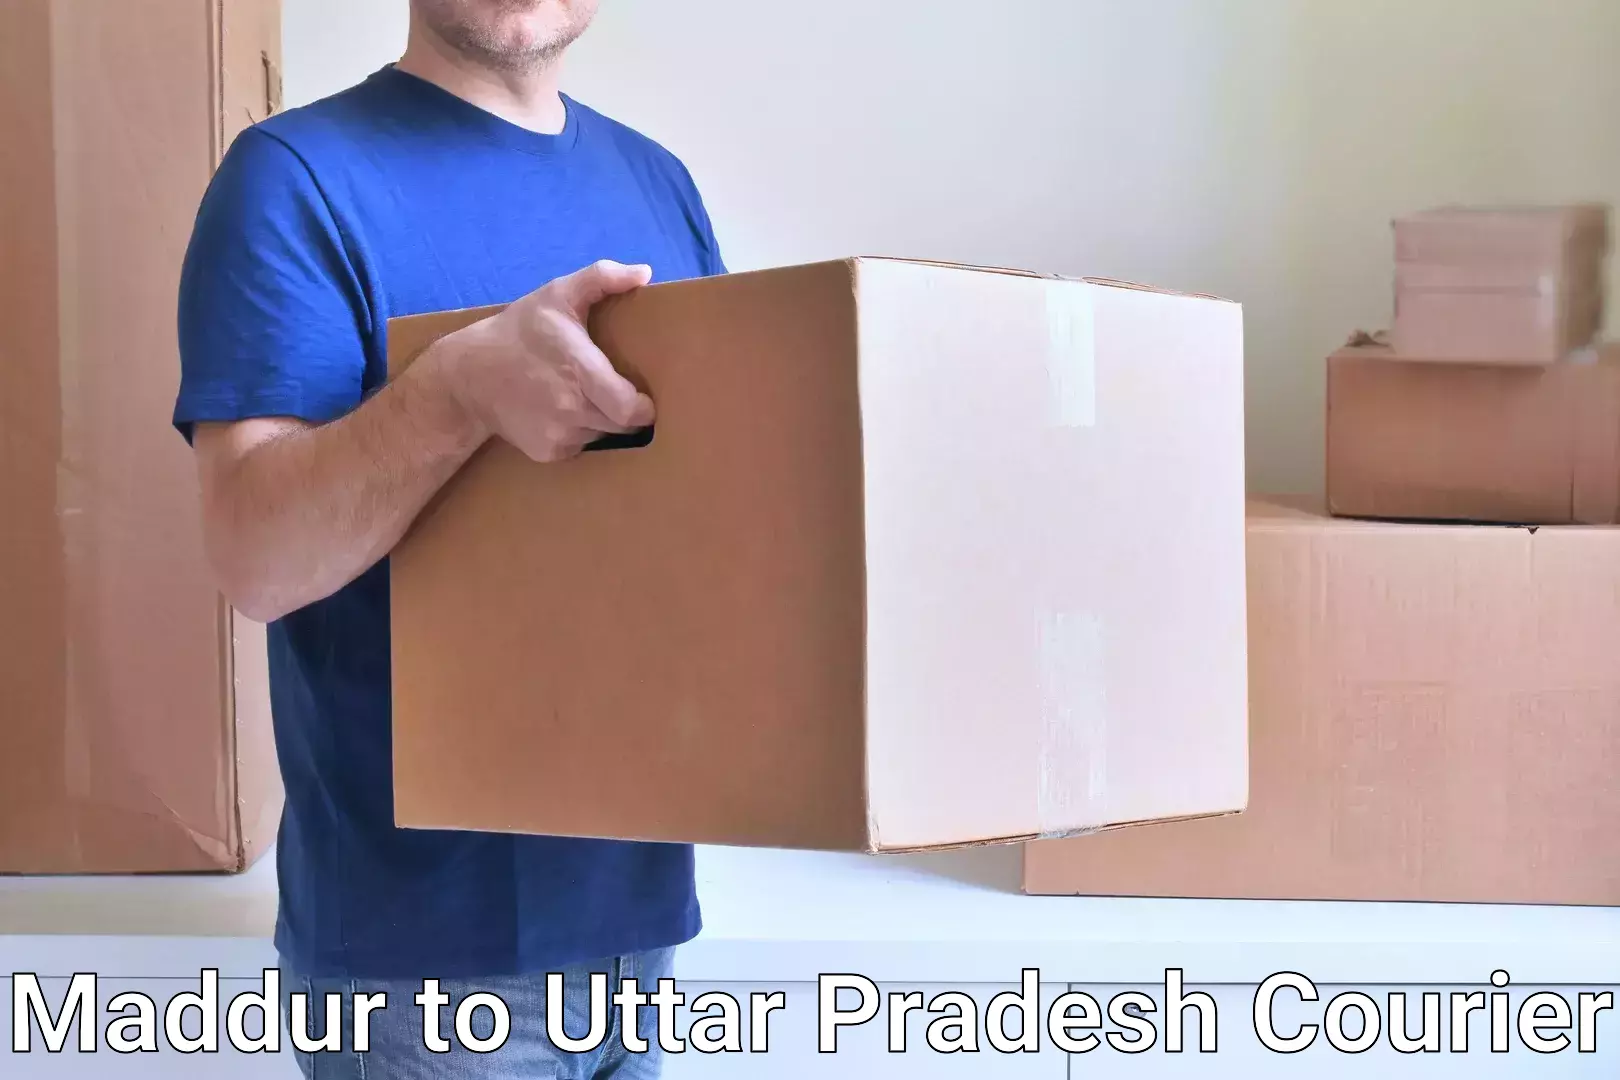 Personal courier services Maddur to Kairana